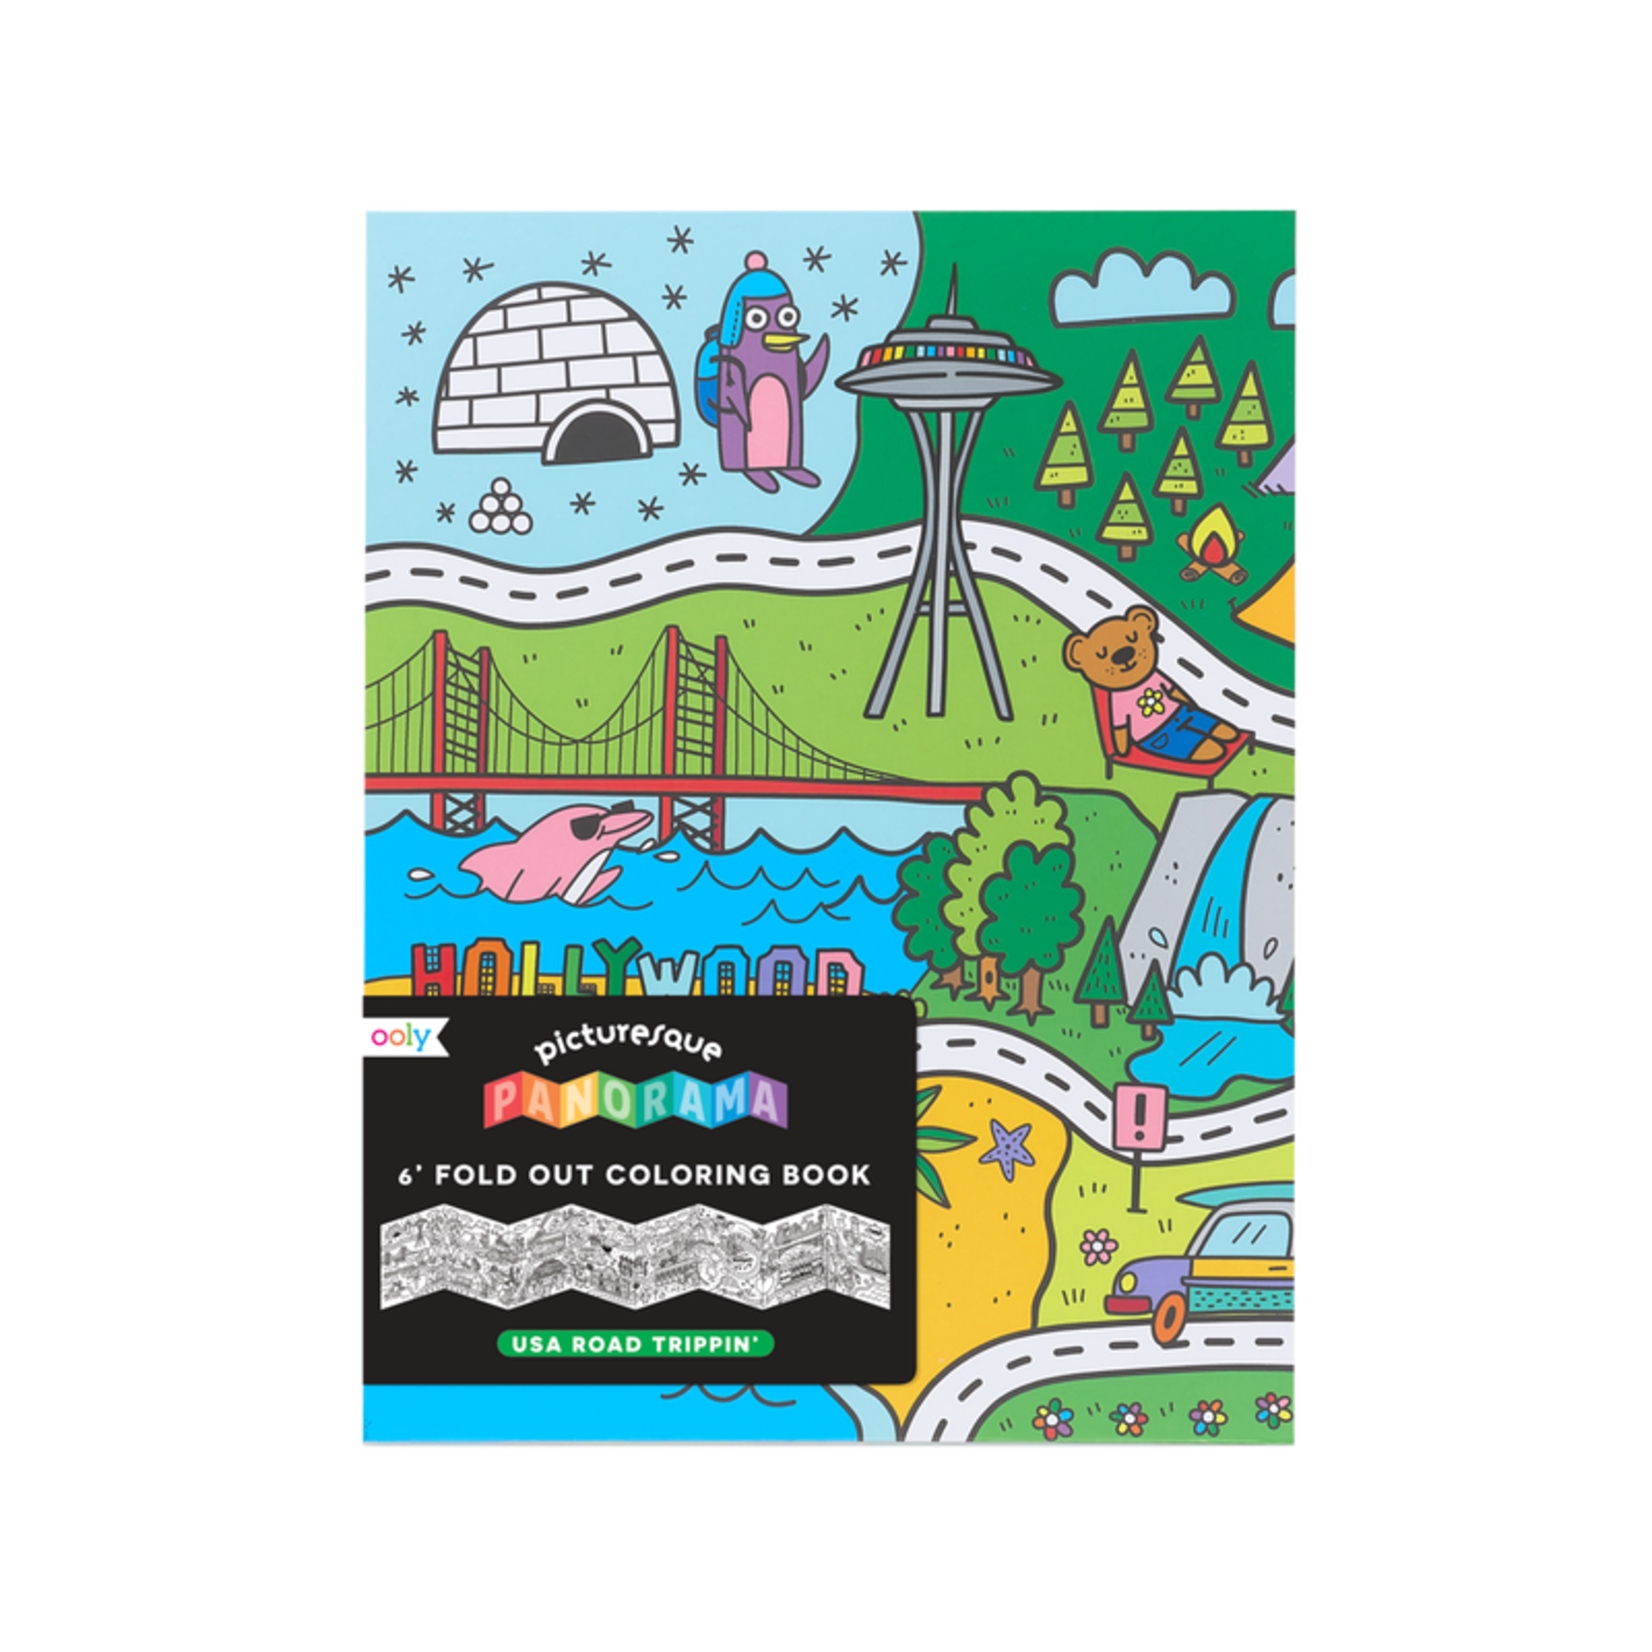 ooly Picturesque Panorama 6 Foot Fold Out Coloring Book